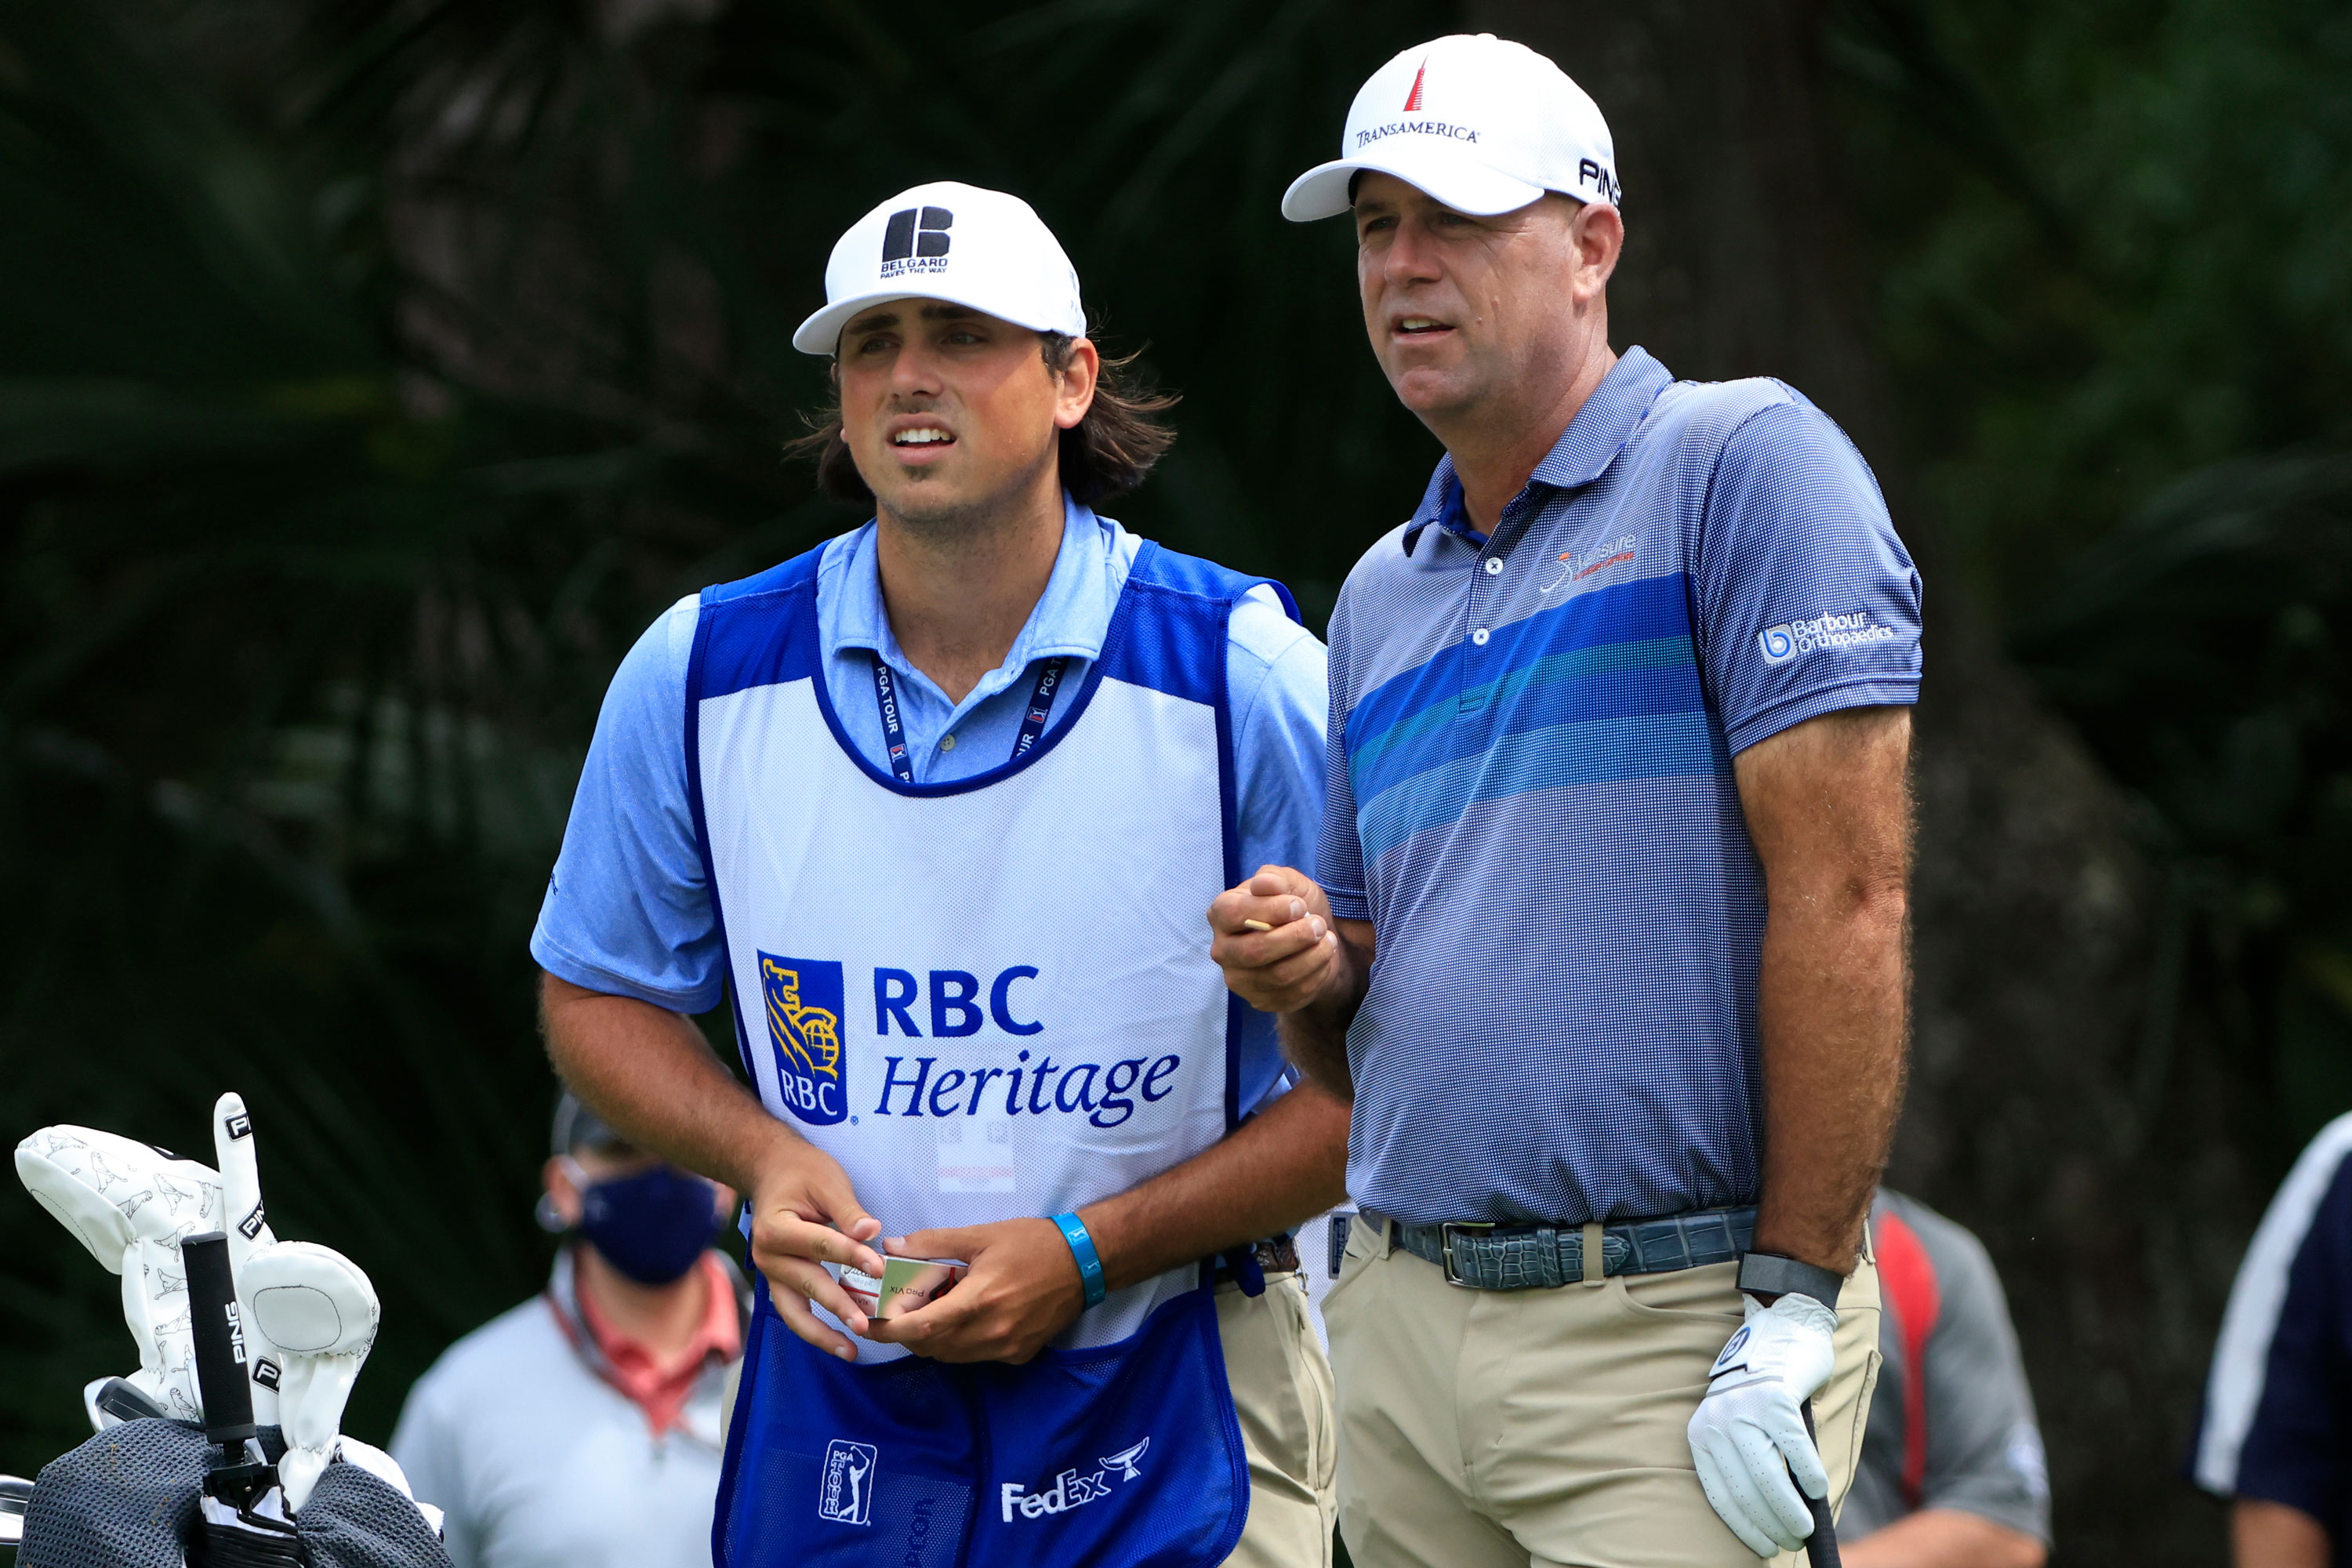 Stewart Cink follows one bad shot with 62 good ones to get in contention at Harbour Town Golf News and Tour Information GolfDigest